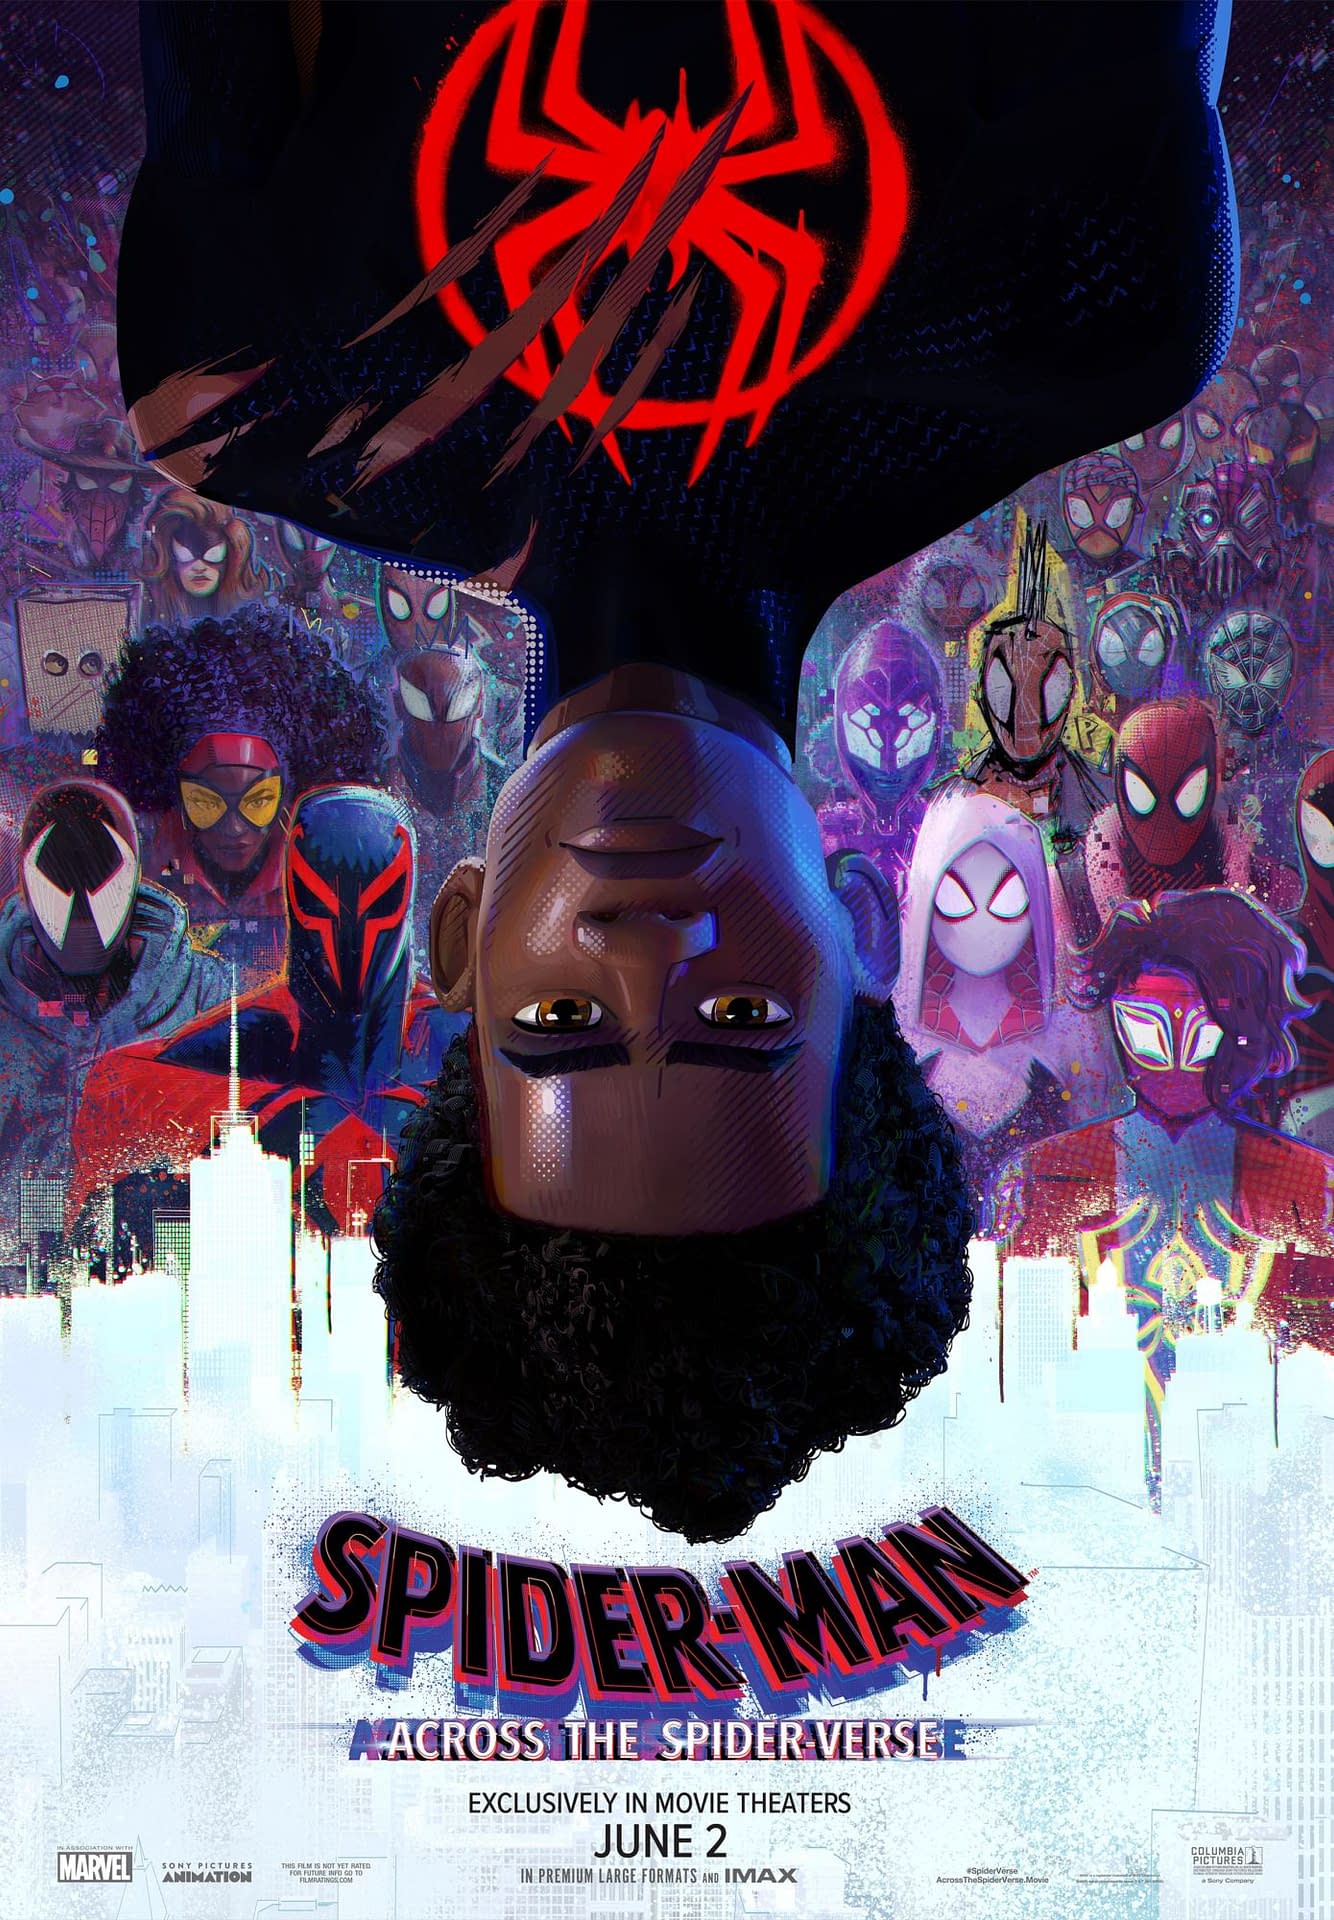 Spider-Man: Across the Spider-Verse - New Poster and Images Released